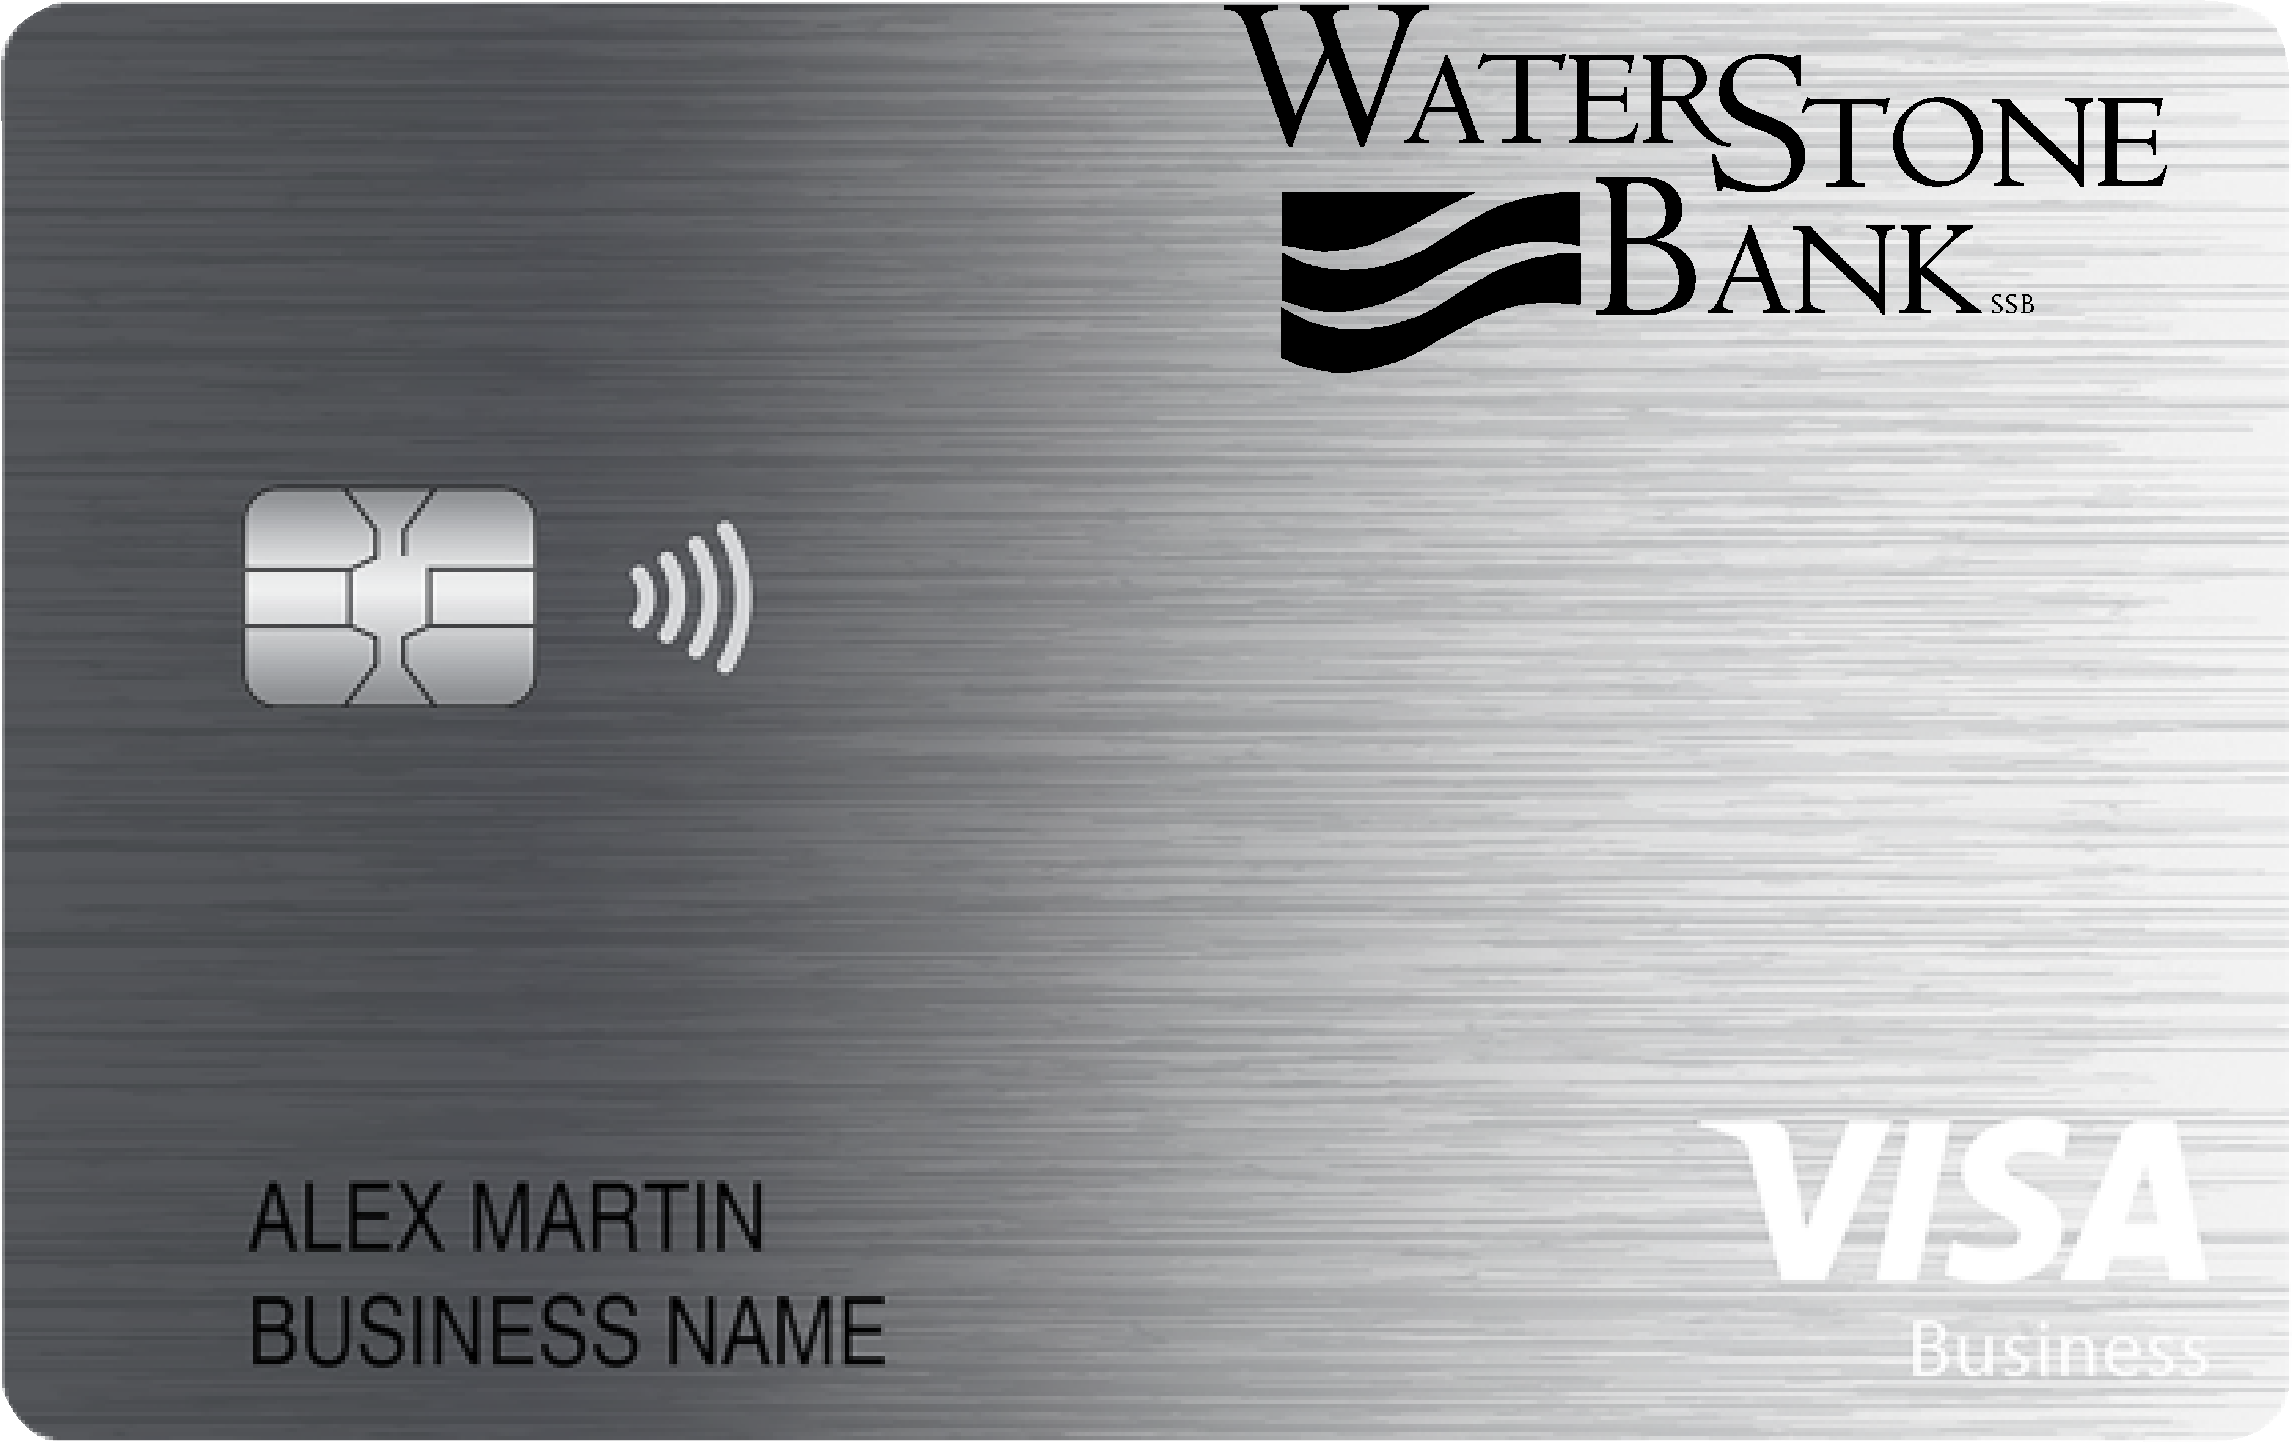 WaterStone Bank Business Cash Preferred Card